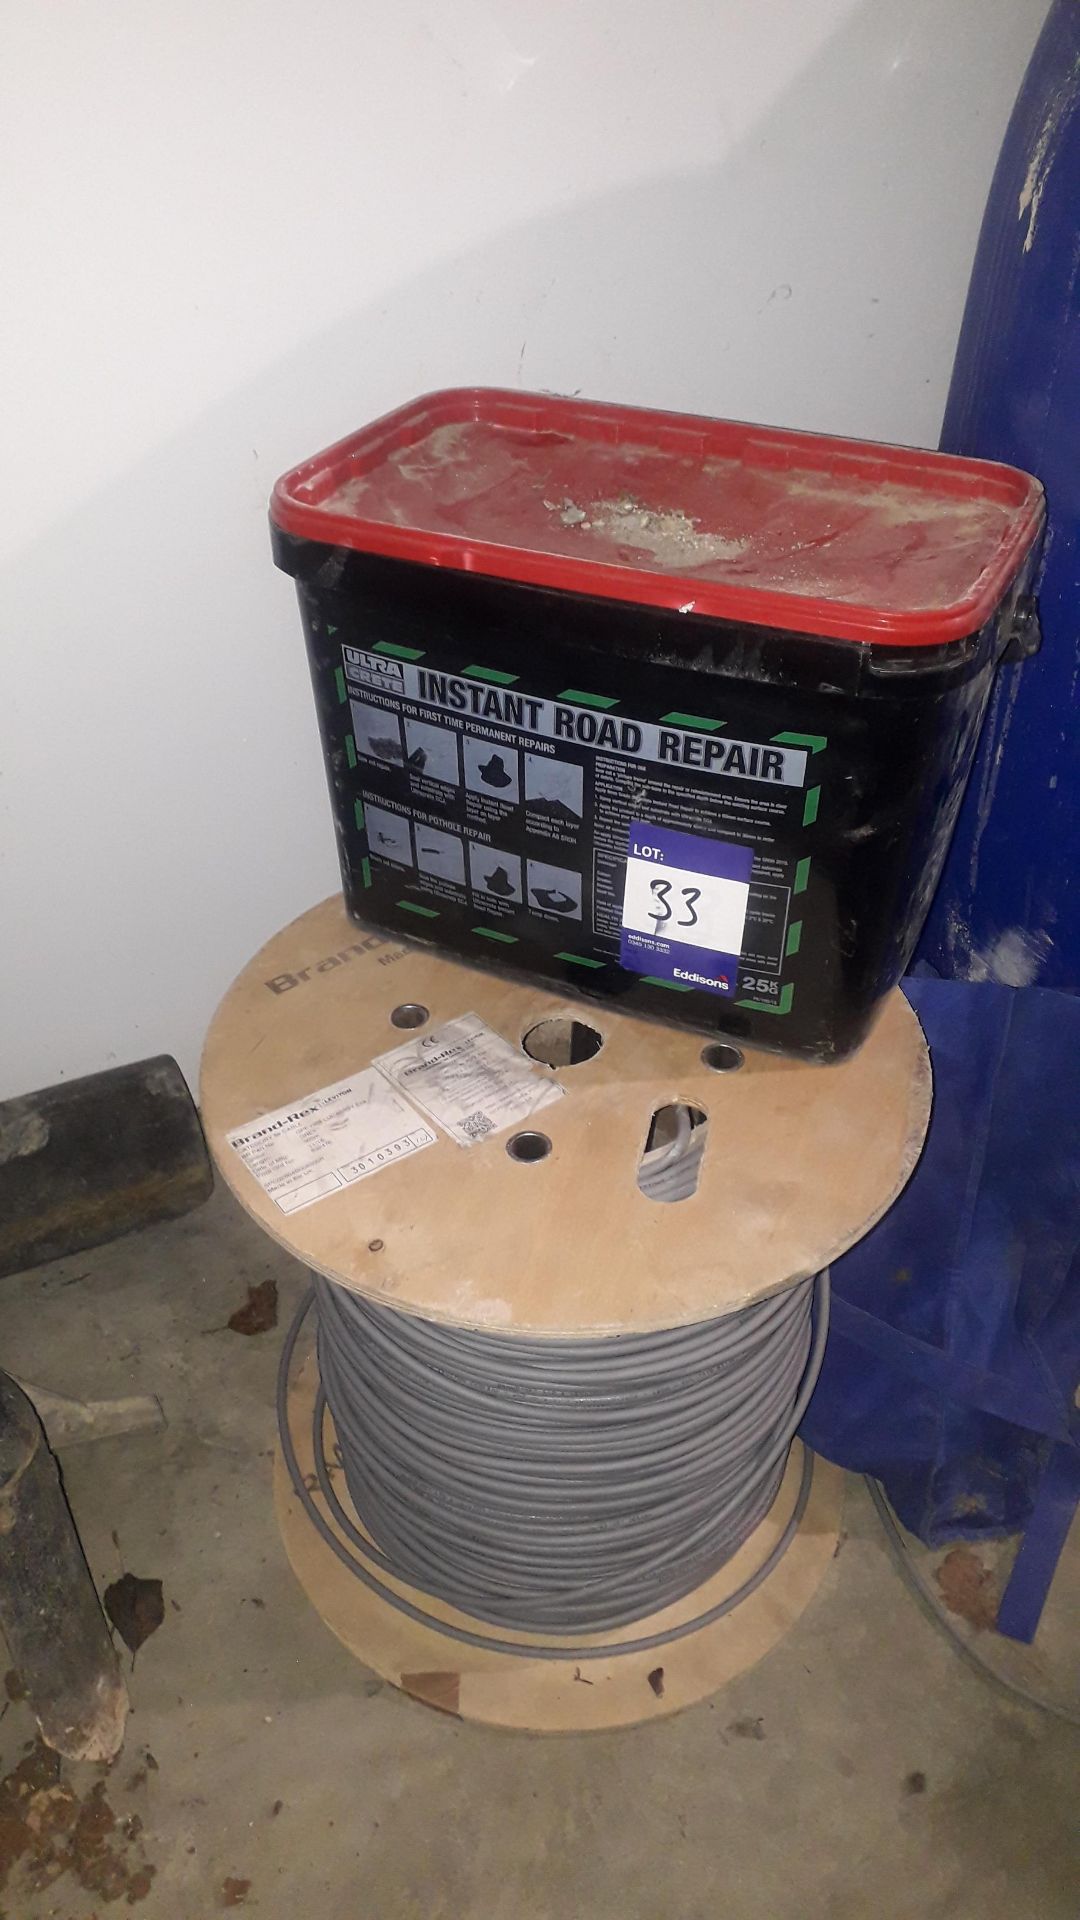 25kg Container of Ultra Crete Instant Road Repair and a Part Used 500m Cat 5e Cable Reel Located